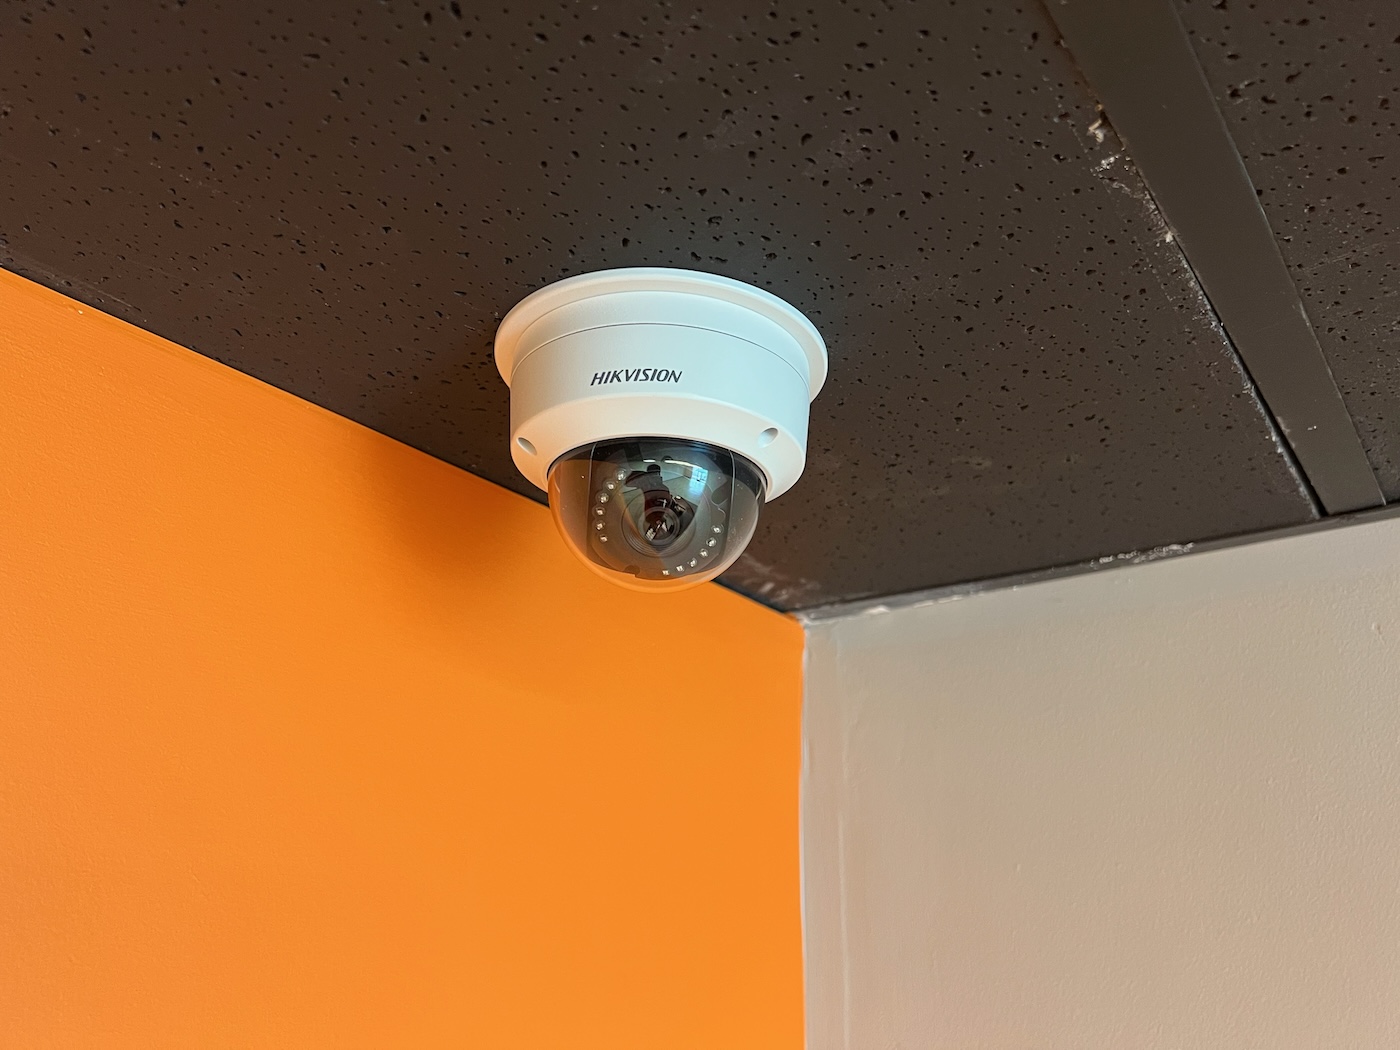 Hikvision security camera installed in drop ceiling